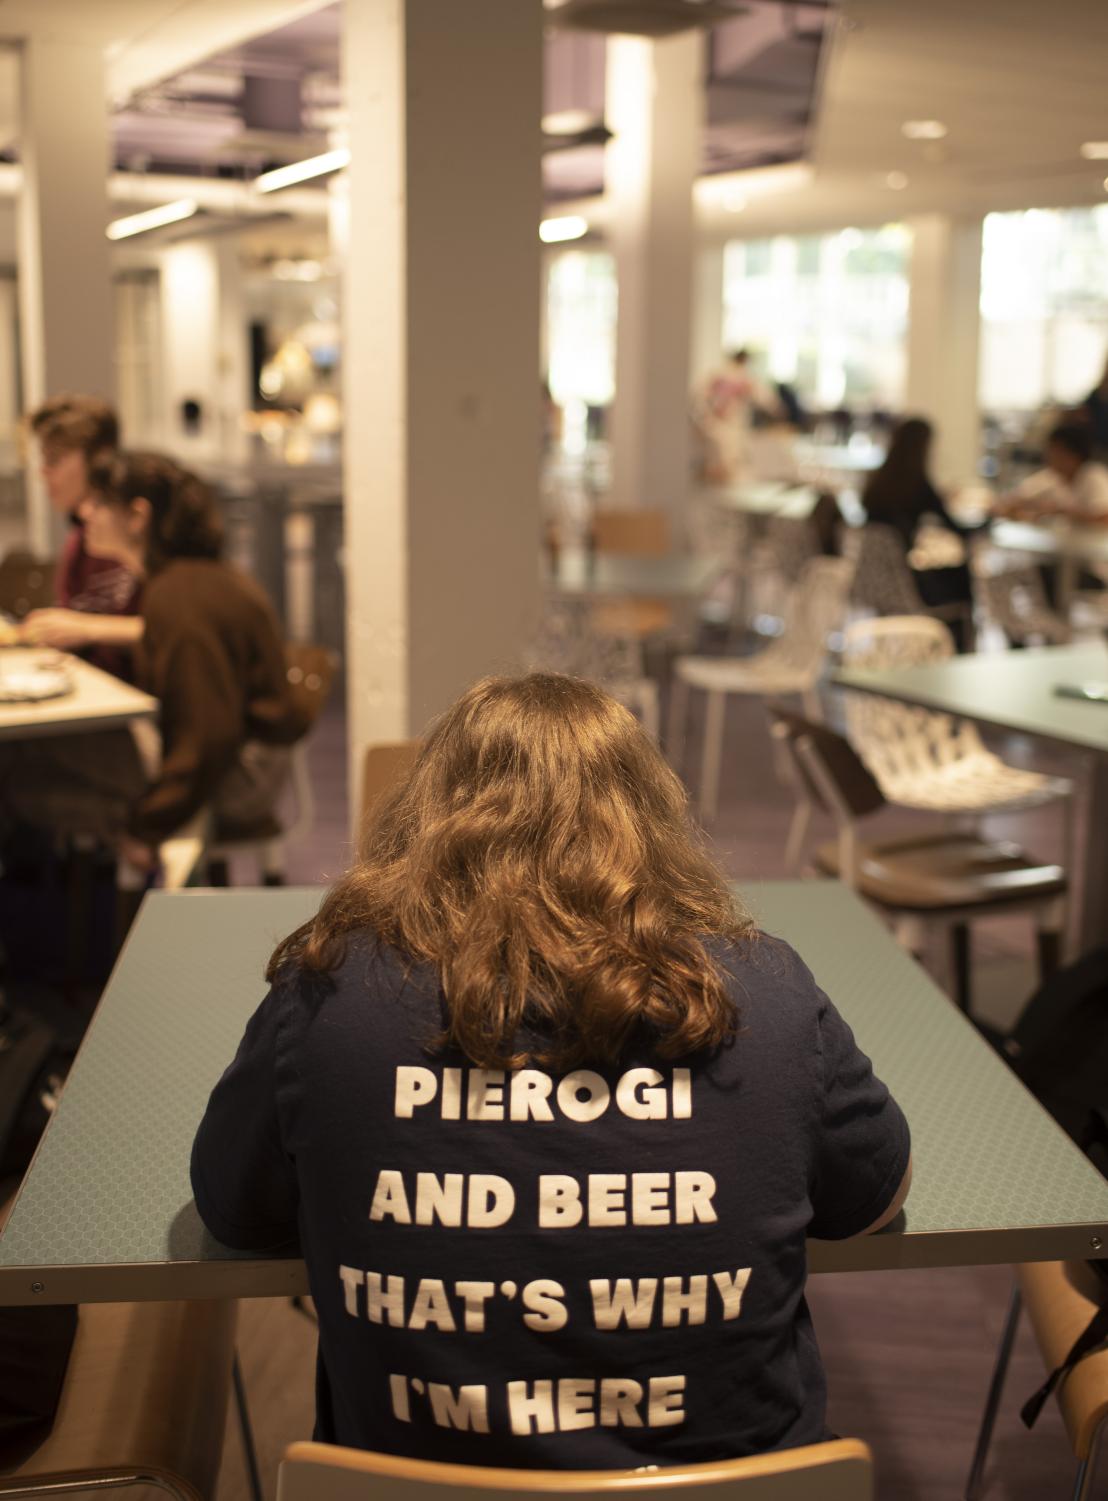 An+individual+sits+with+her+back+turned+to+the+camera.+The+inscription+on+her+shirt+says%3A+%E2%80%9CPierogi+and+beer%2C+that%E2%80%99s+why+I%E2%80%99m+here.%E2%80%9D